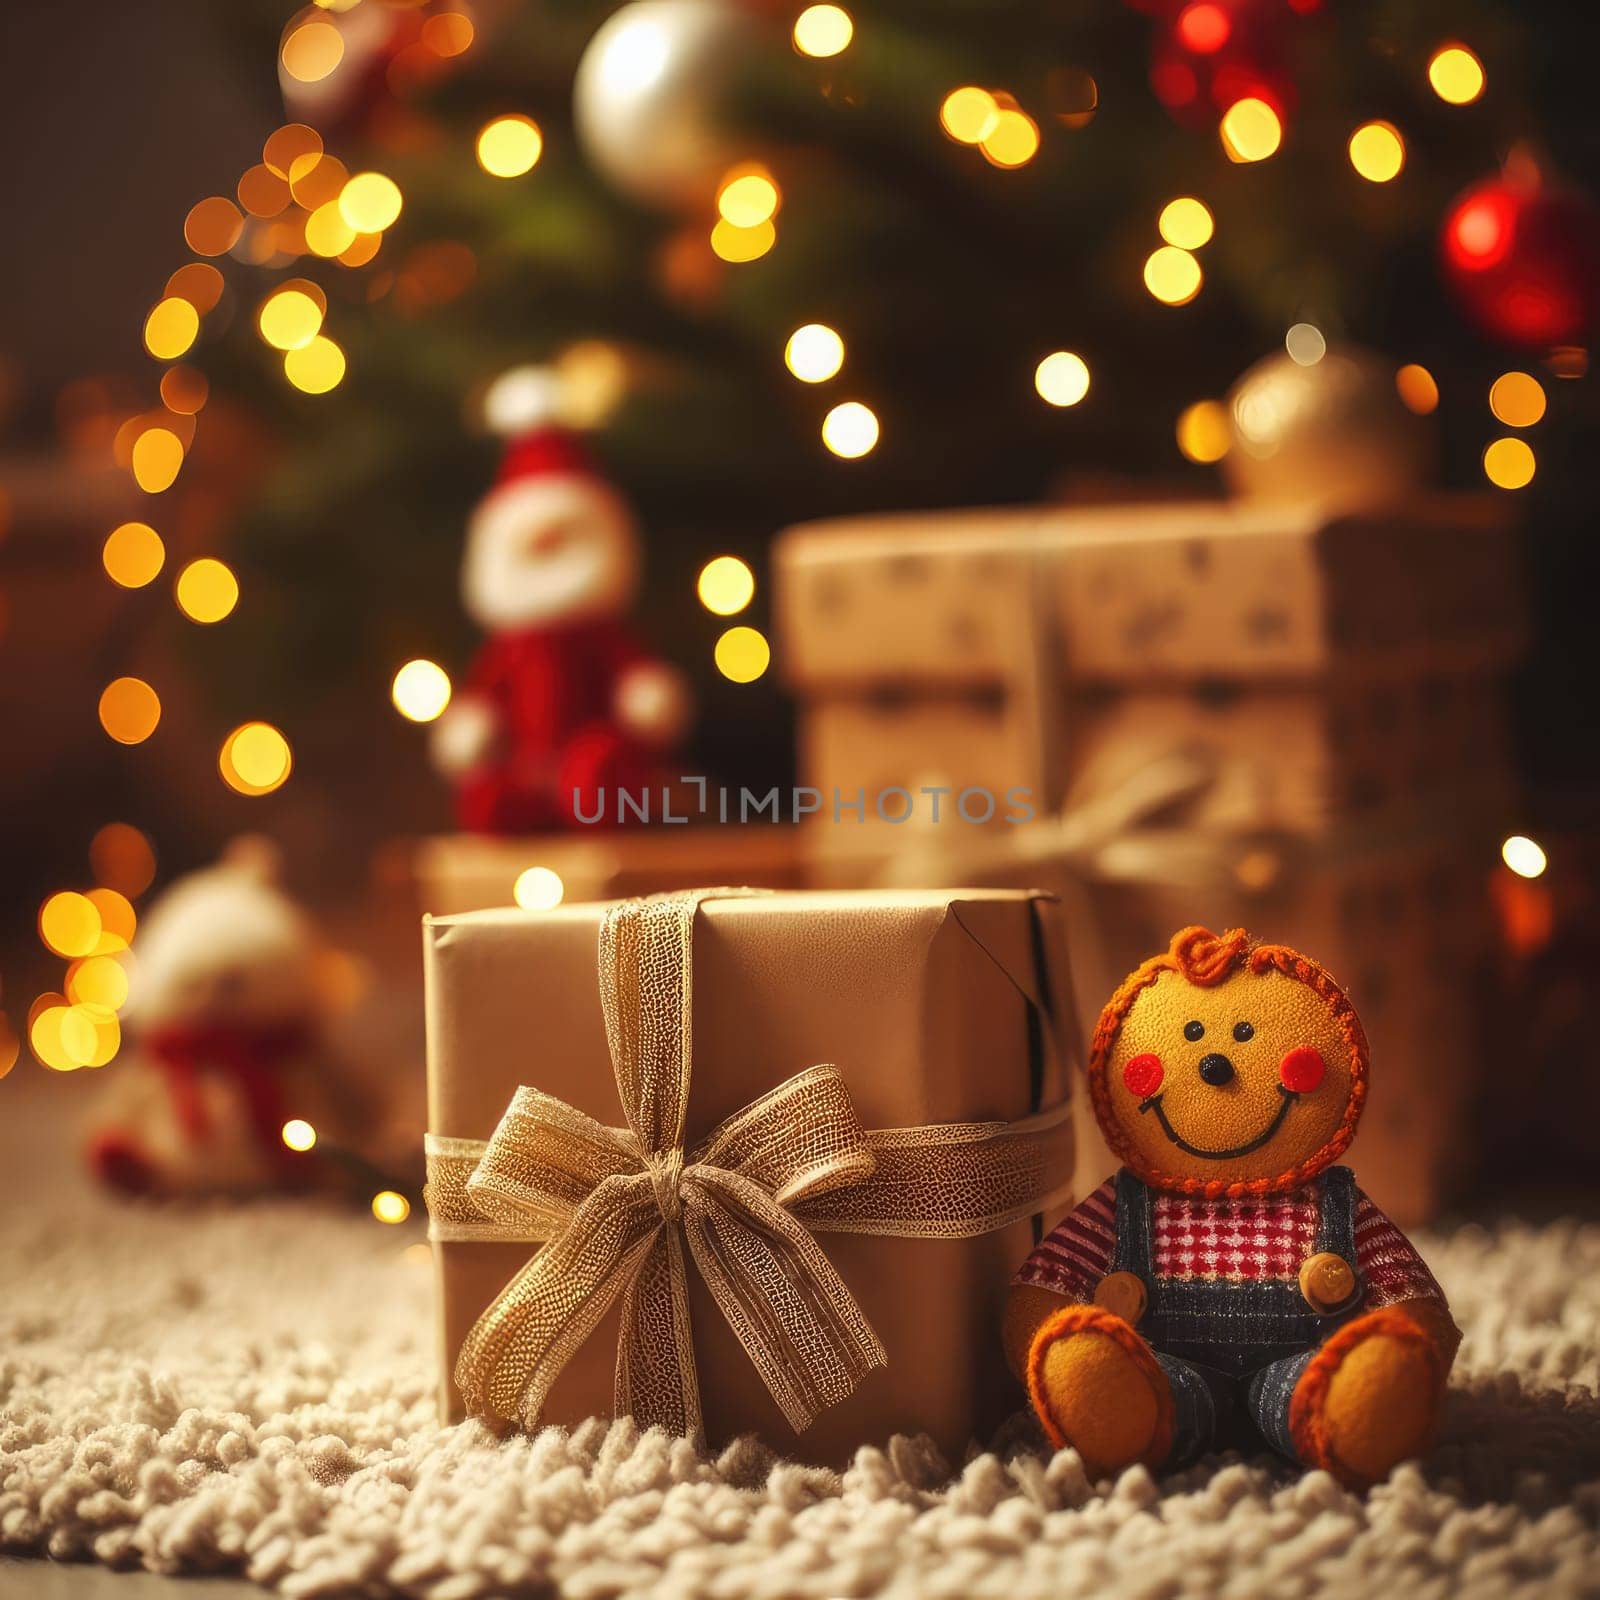 Luxury New Year gifts, different present boxes under Christmas tree in holiday eve, Christmastime celebration, home decorated with festive shiny balls, magic night